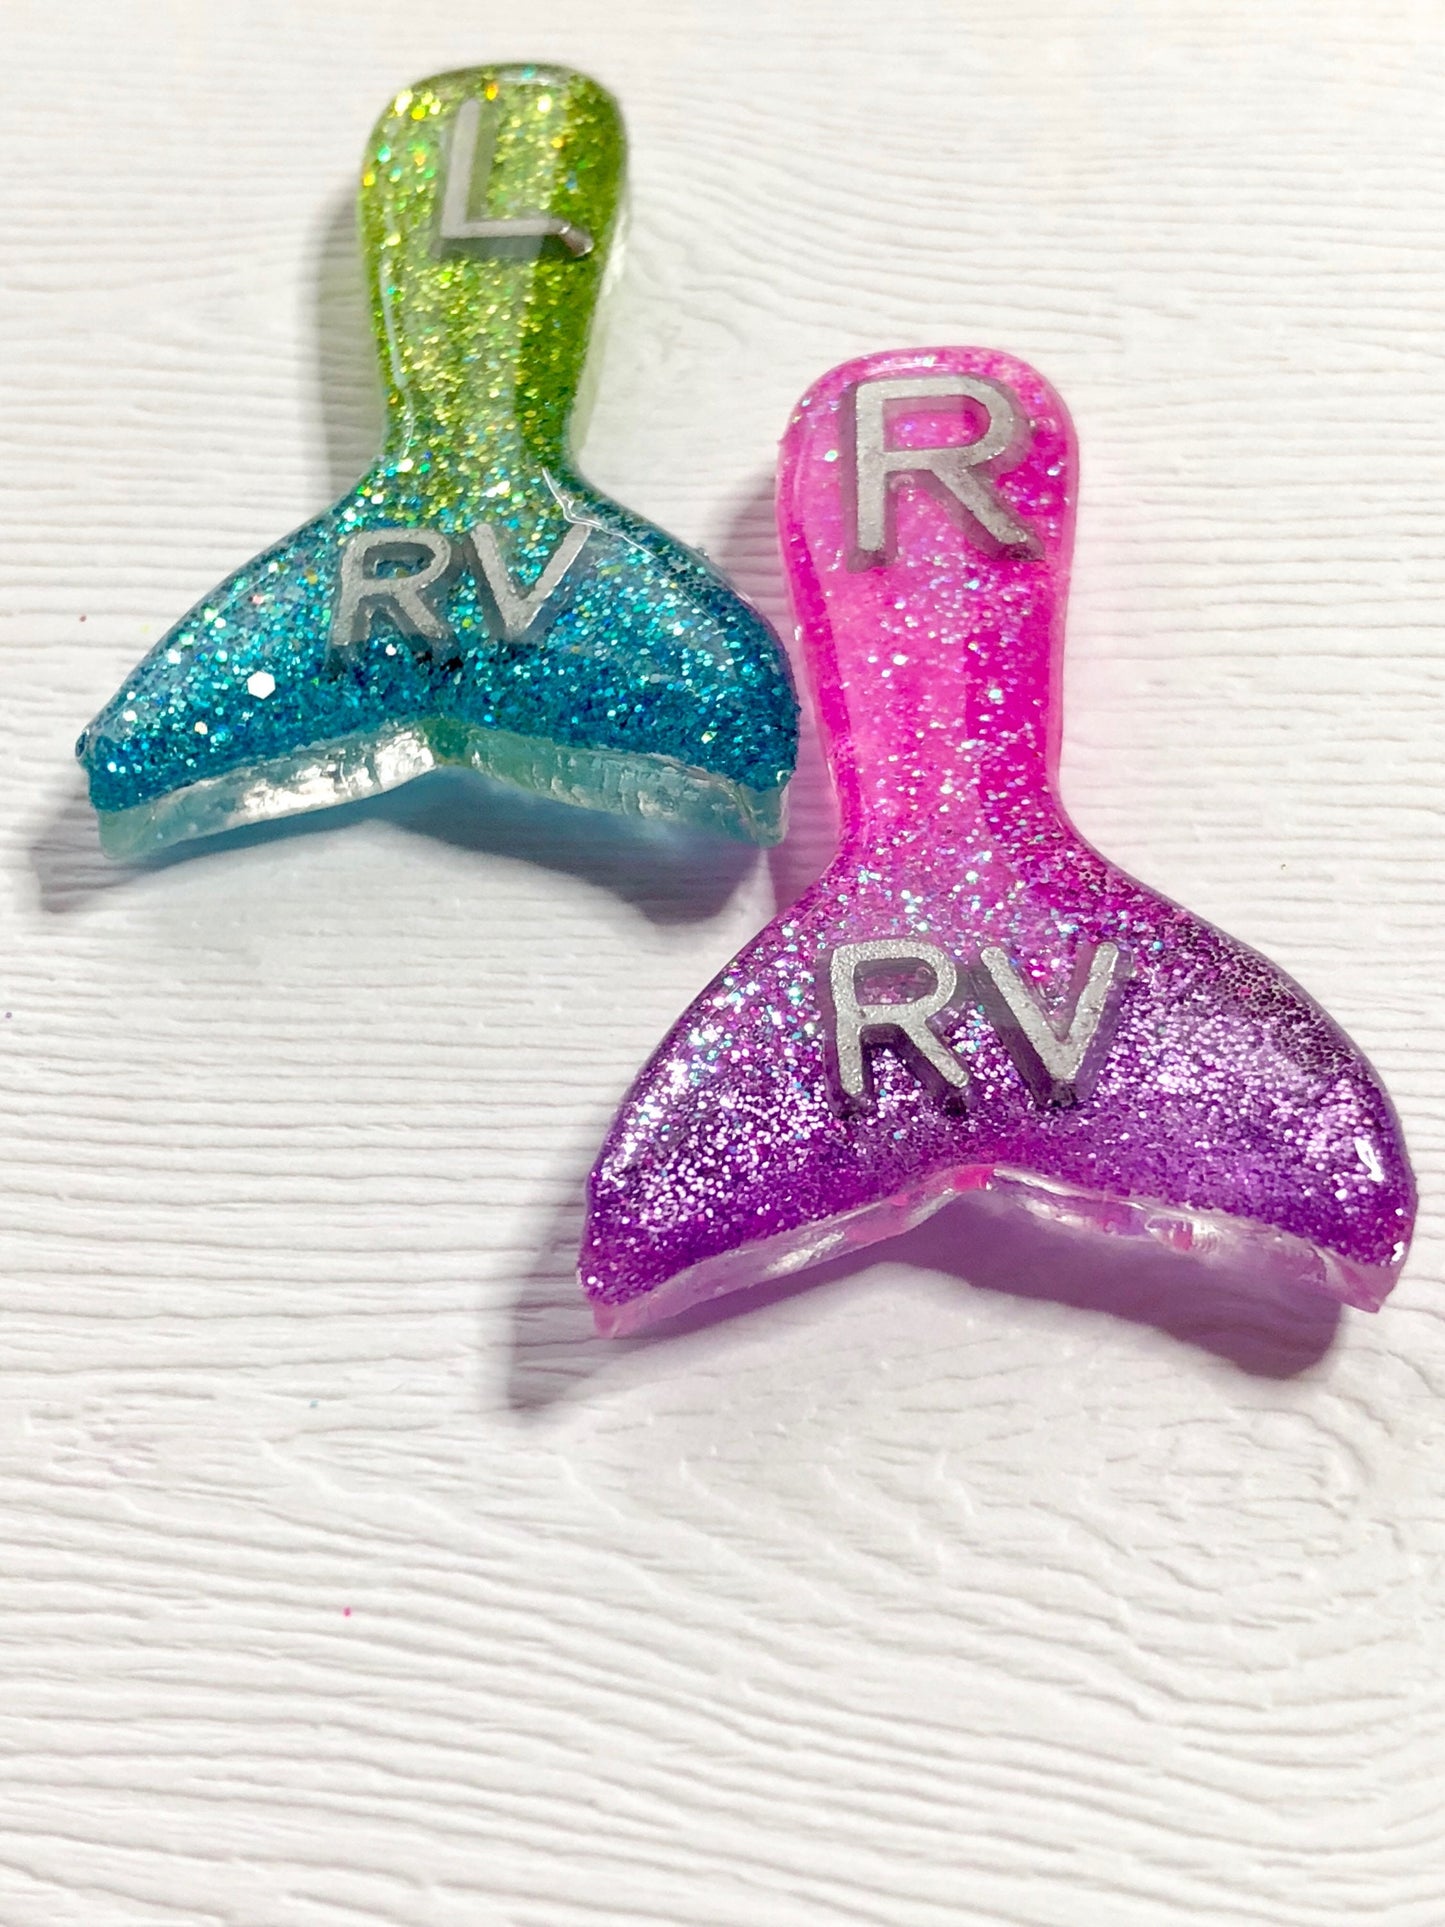 Mermaid Tail Xray Markers Customized with 2 Initials Pink/Purple and Teal/Green